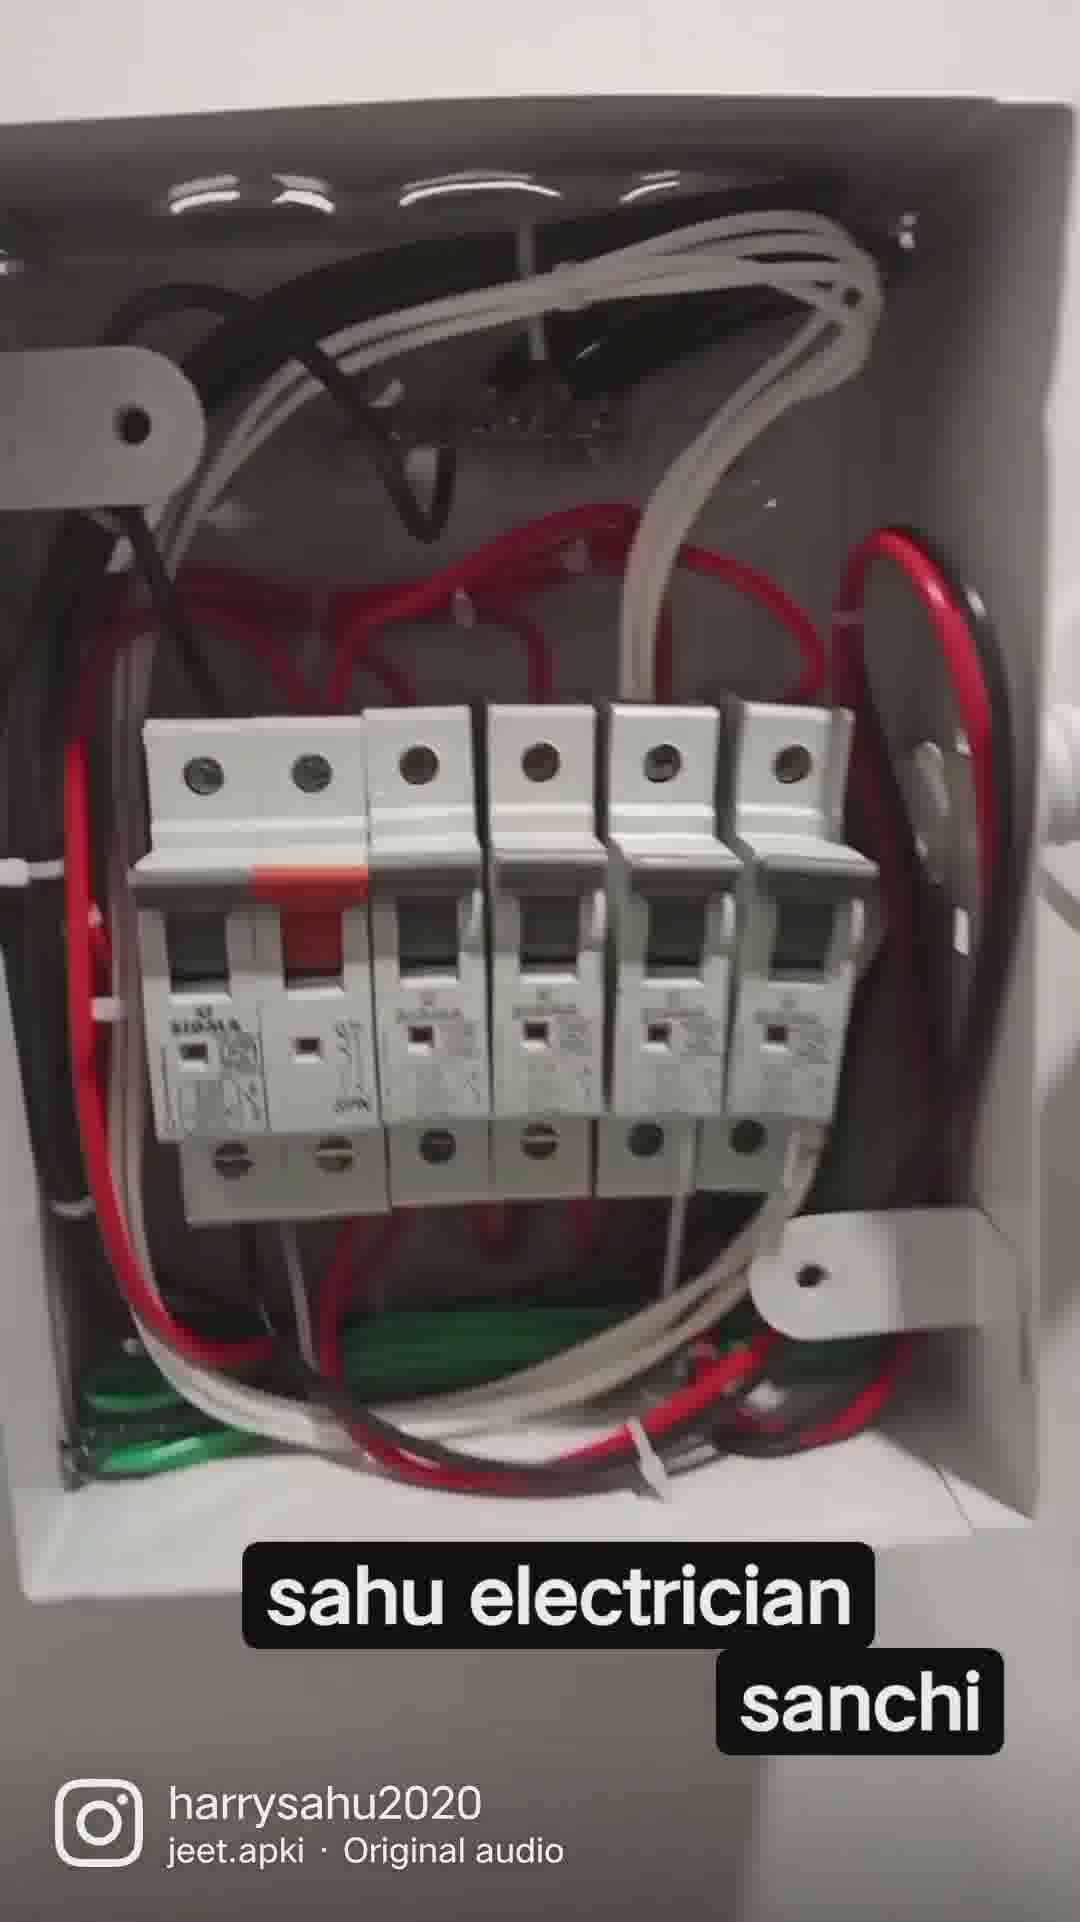 #Electrician #mcb #wiring